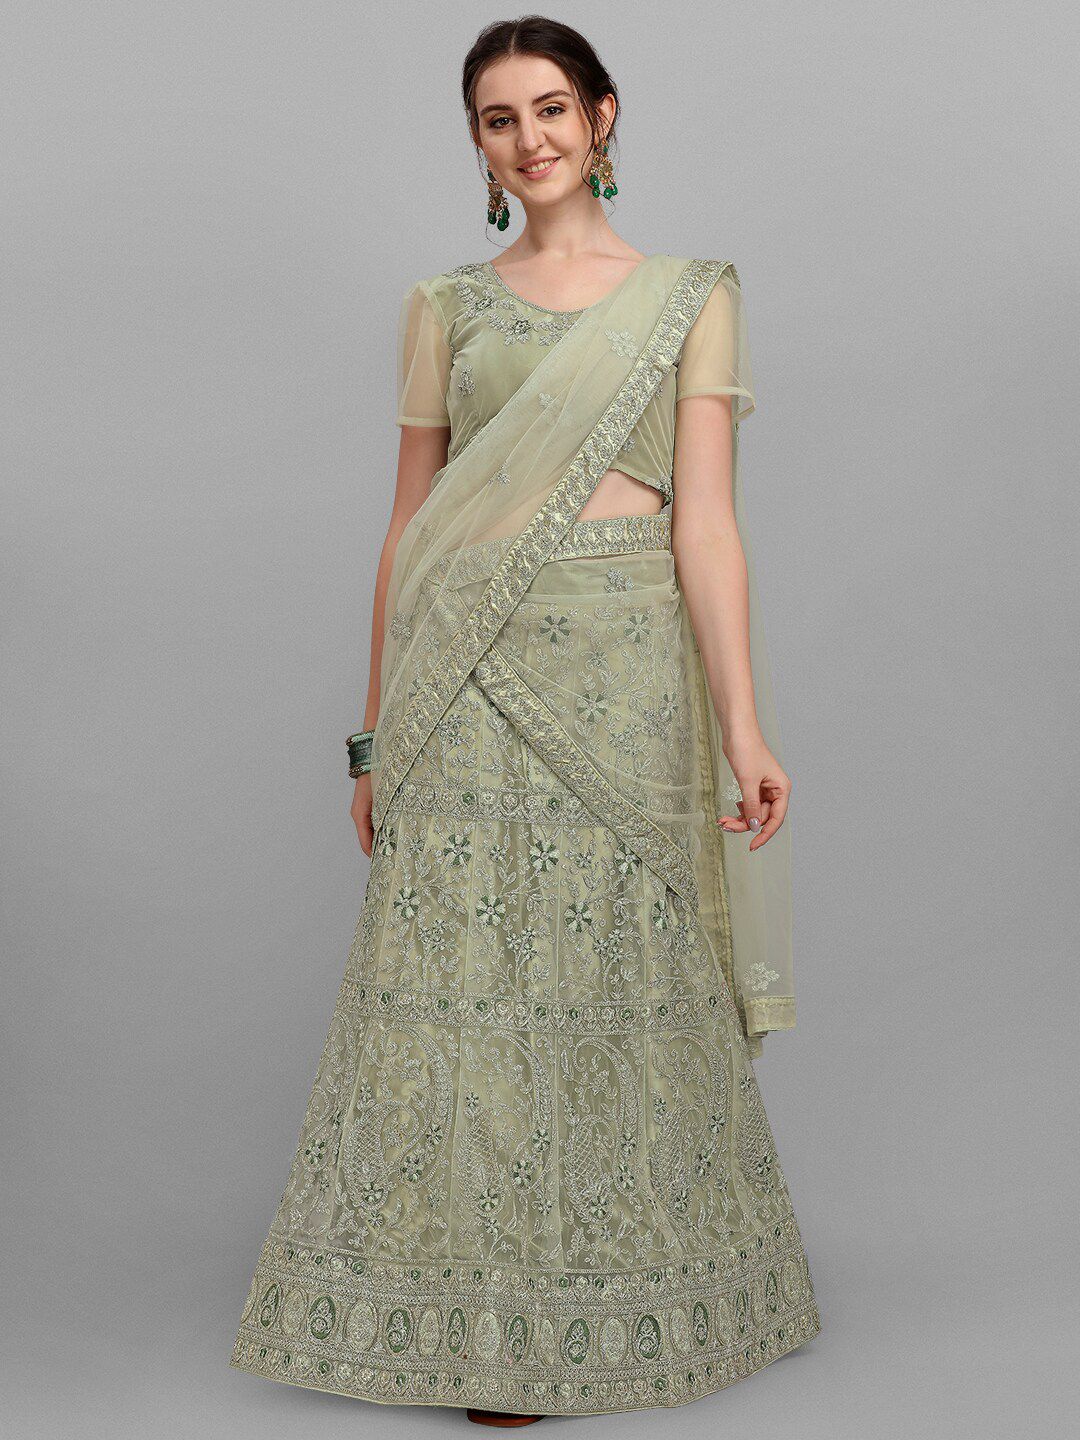 V SALES Olive Green Embroidered Zari Work Semi-Stitched Lehenga & Unstitched Blouse With Dupatta Price in India